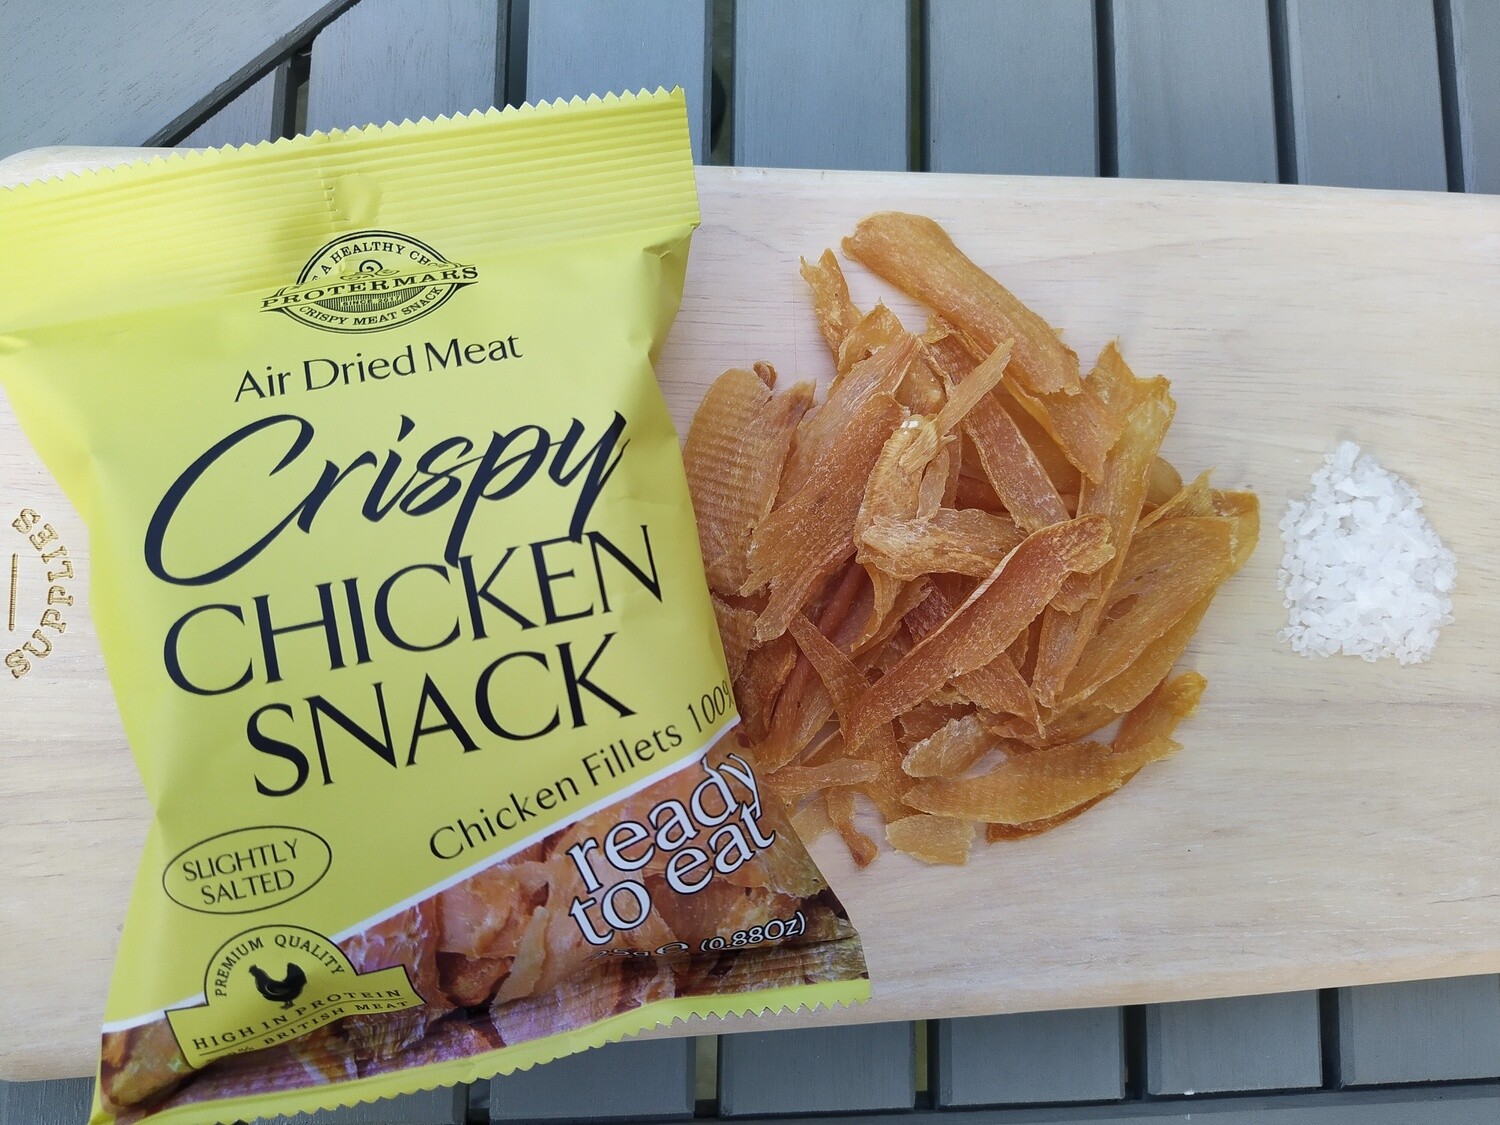 Crispy Chicken Snack - 100% Chicken Fillet , 85% Protein - 6 bags x 25g - Keto Friendly,Low carb